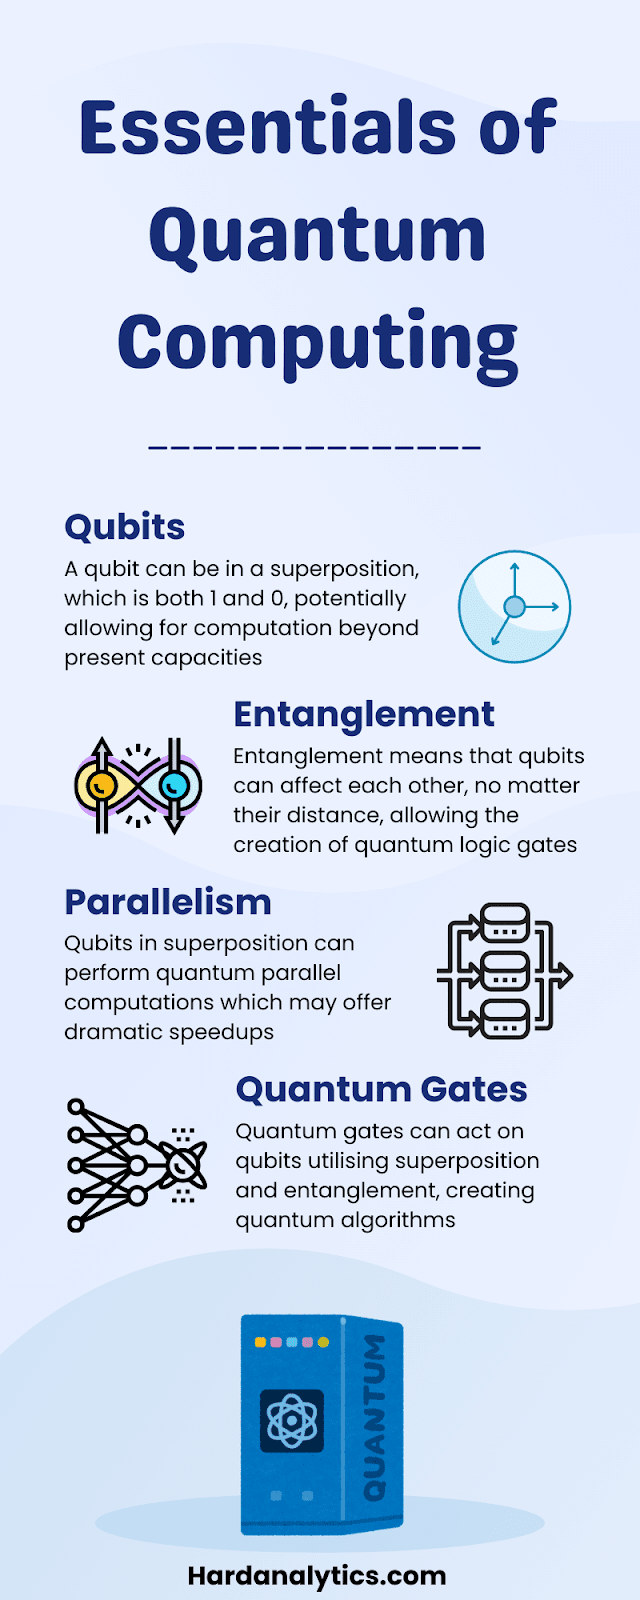 This infographic illustrates core features of quantum computing: qbits, entanglement, parallelism and quantum gates with vibrant imagery